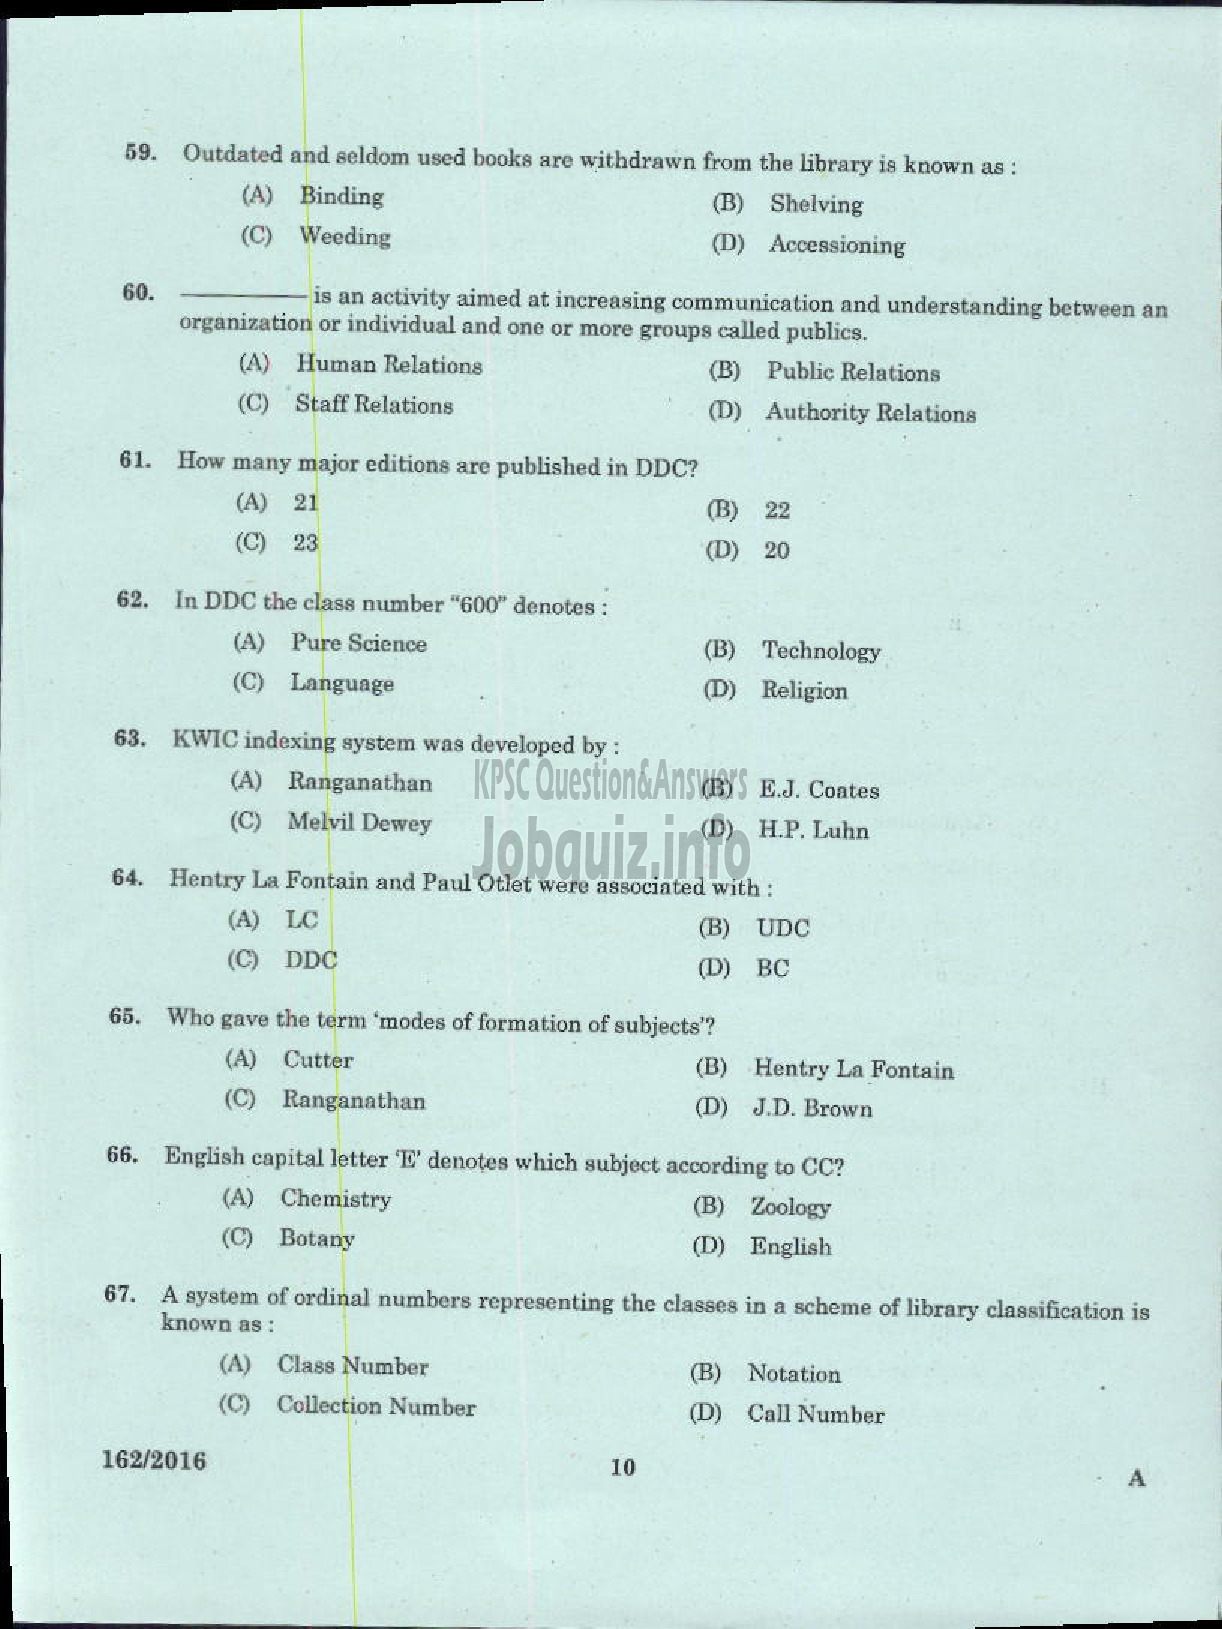 Kerala PSC Question Paper - LIBRARIAN GR IV KERALA COMMON POOL LIBRARY-8